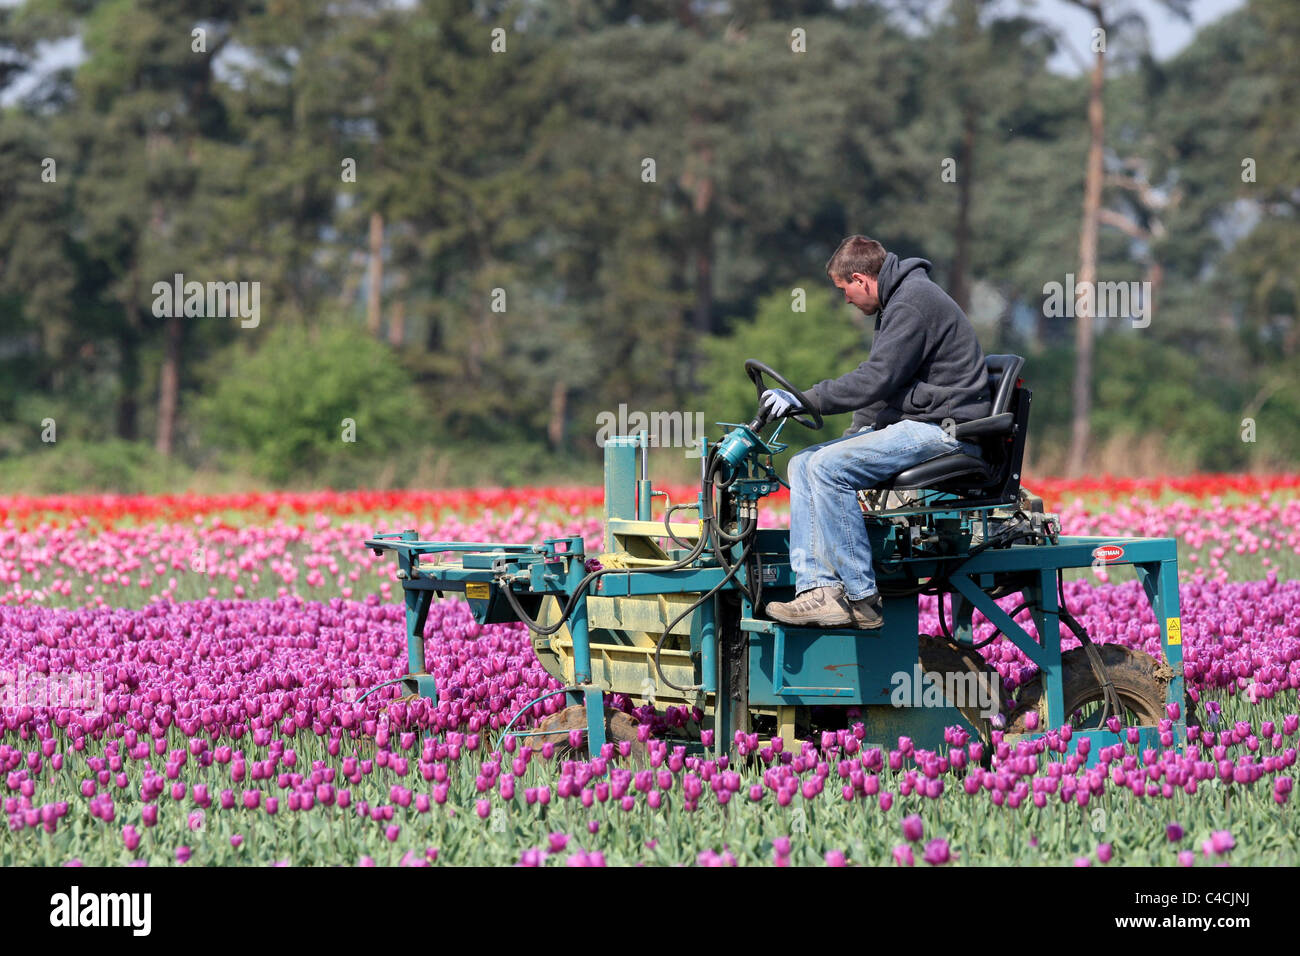 THE LAST OF THE 20 MILLION TULIPS BEING 'HEADED' IN THE TULIP FIELD NEAR NARBOROUGH,NORFOLK. Stock Photo